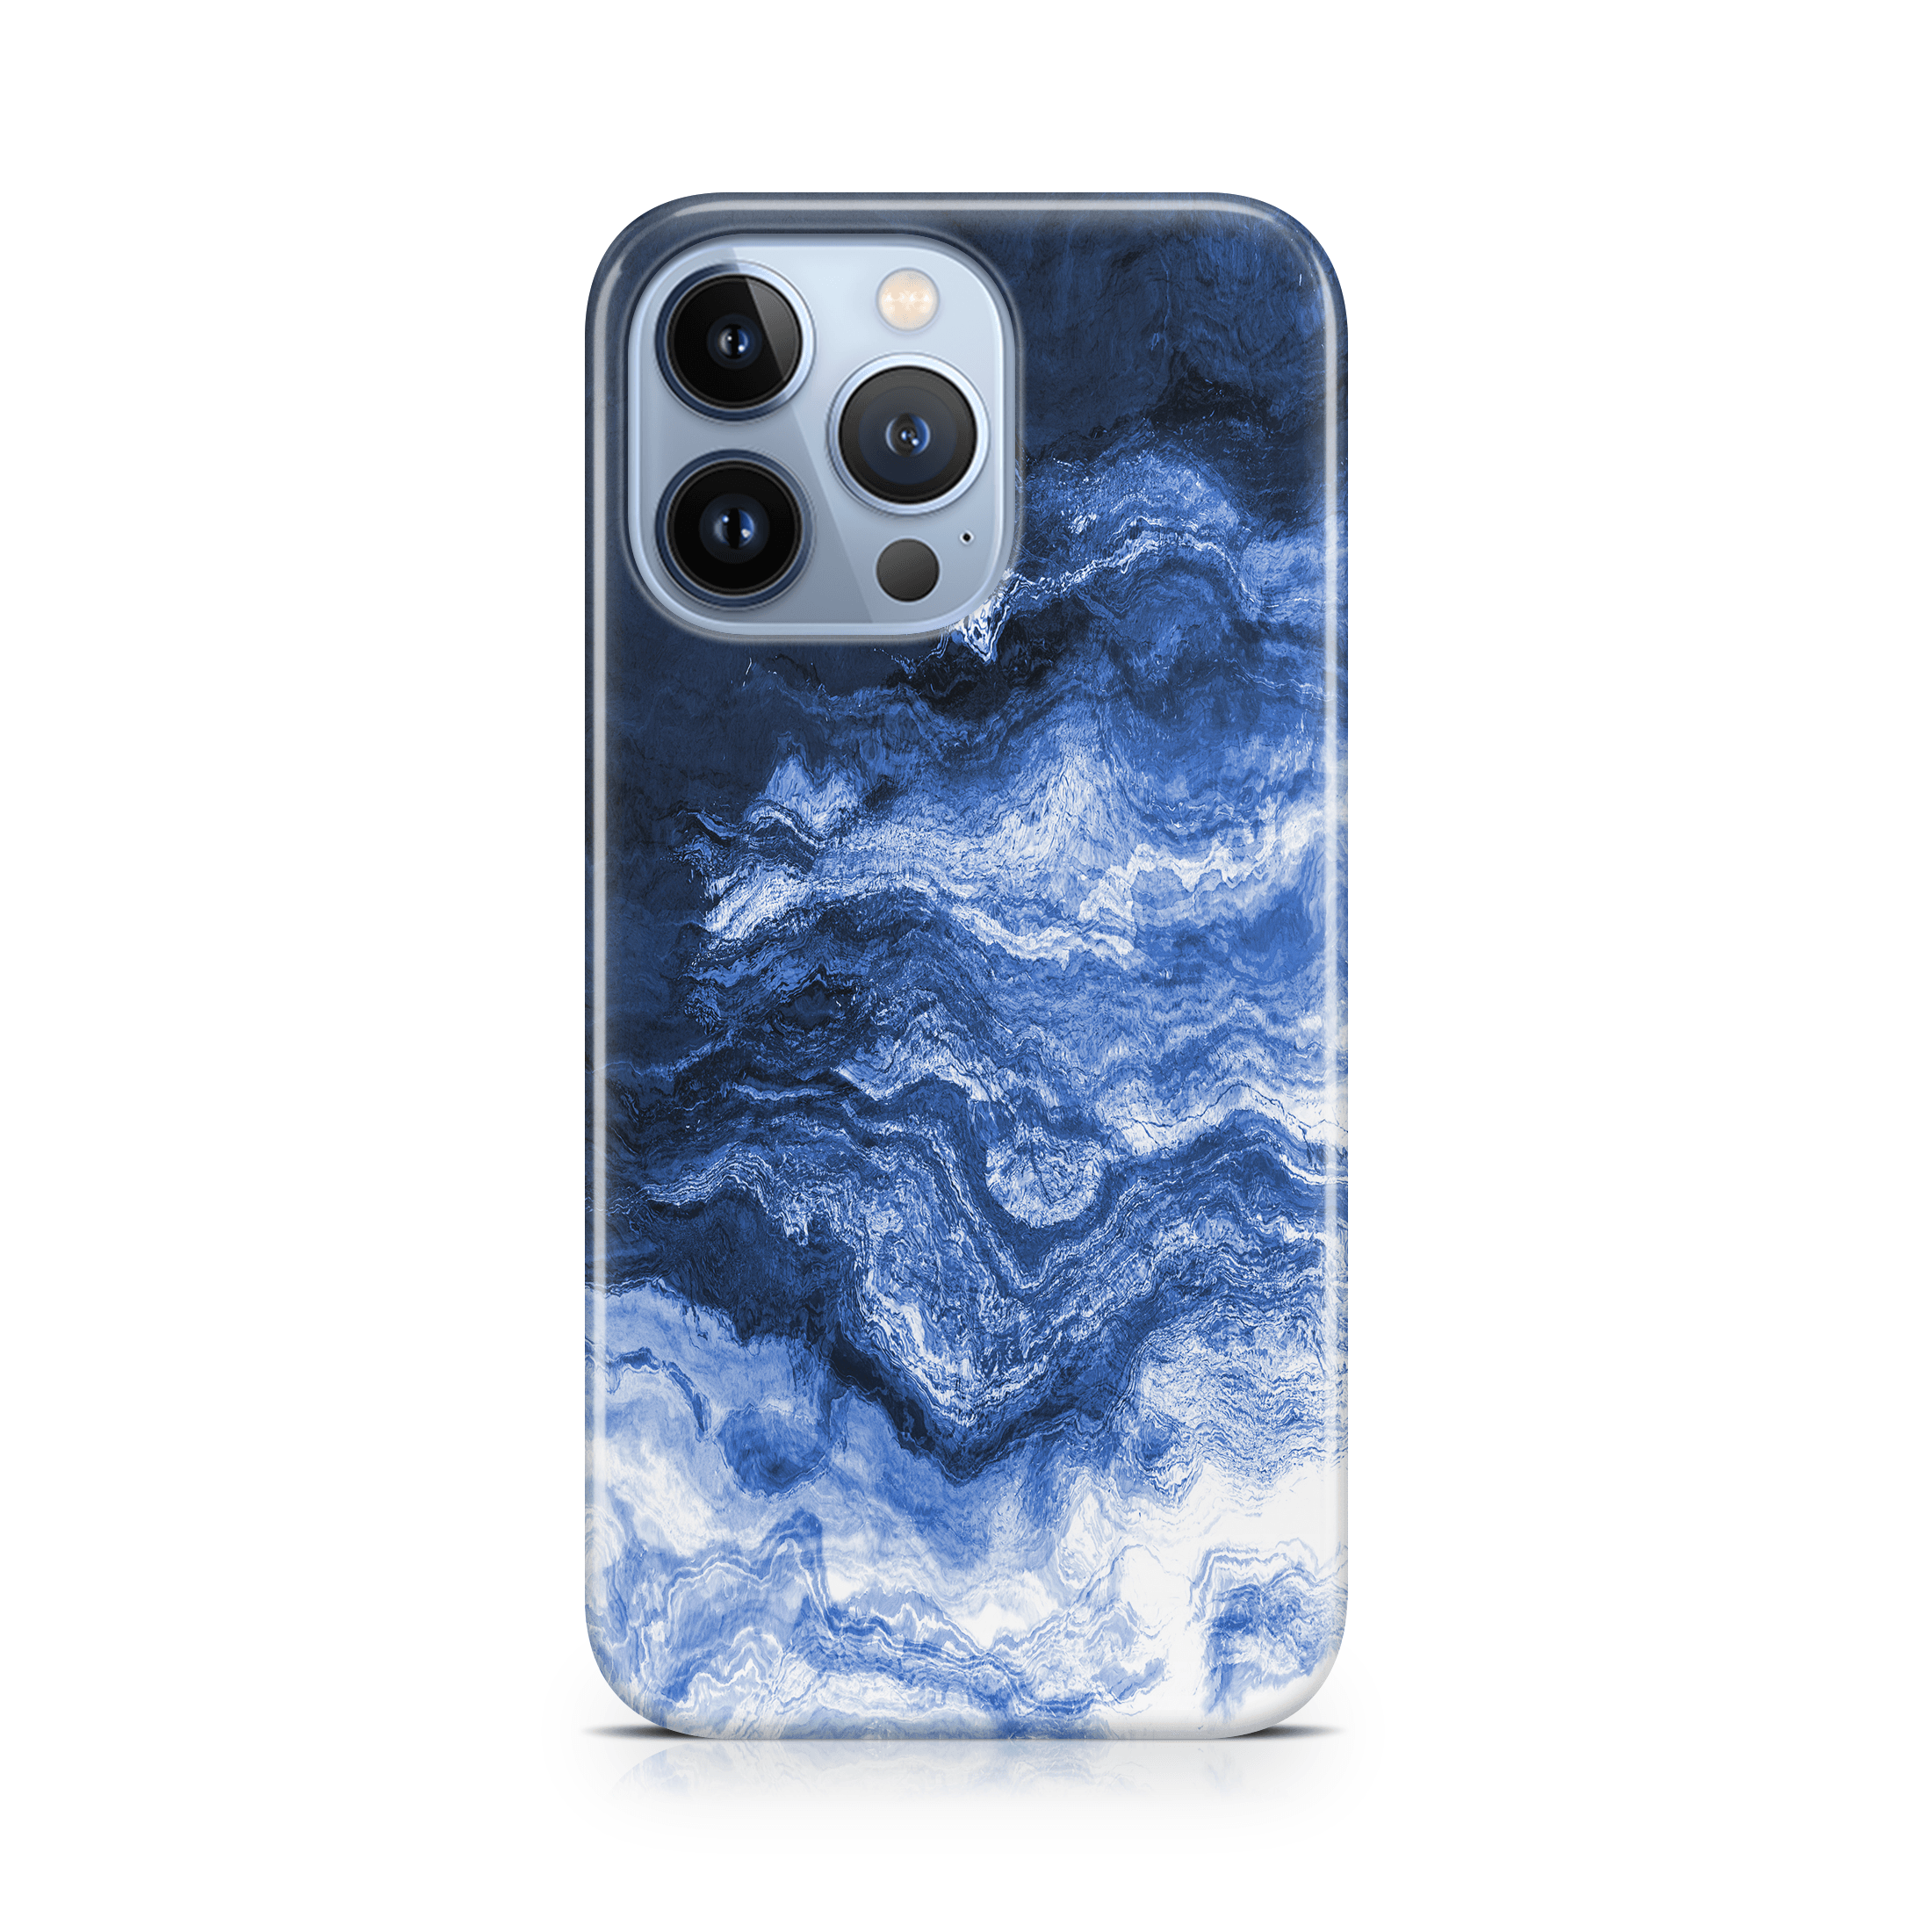 Blue Runner - iPhone phone case designs by CaseSwagger